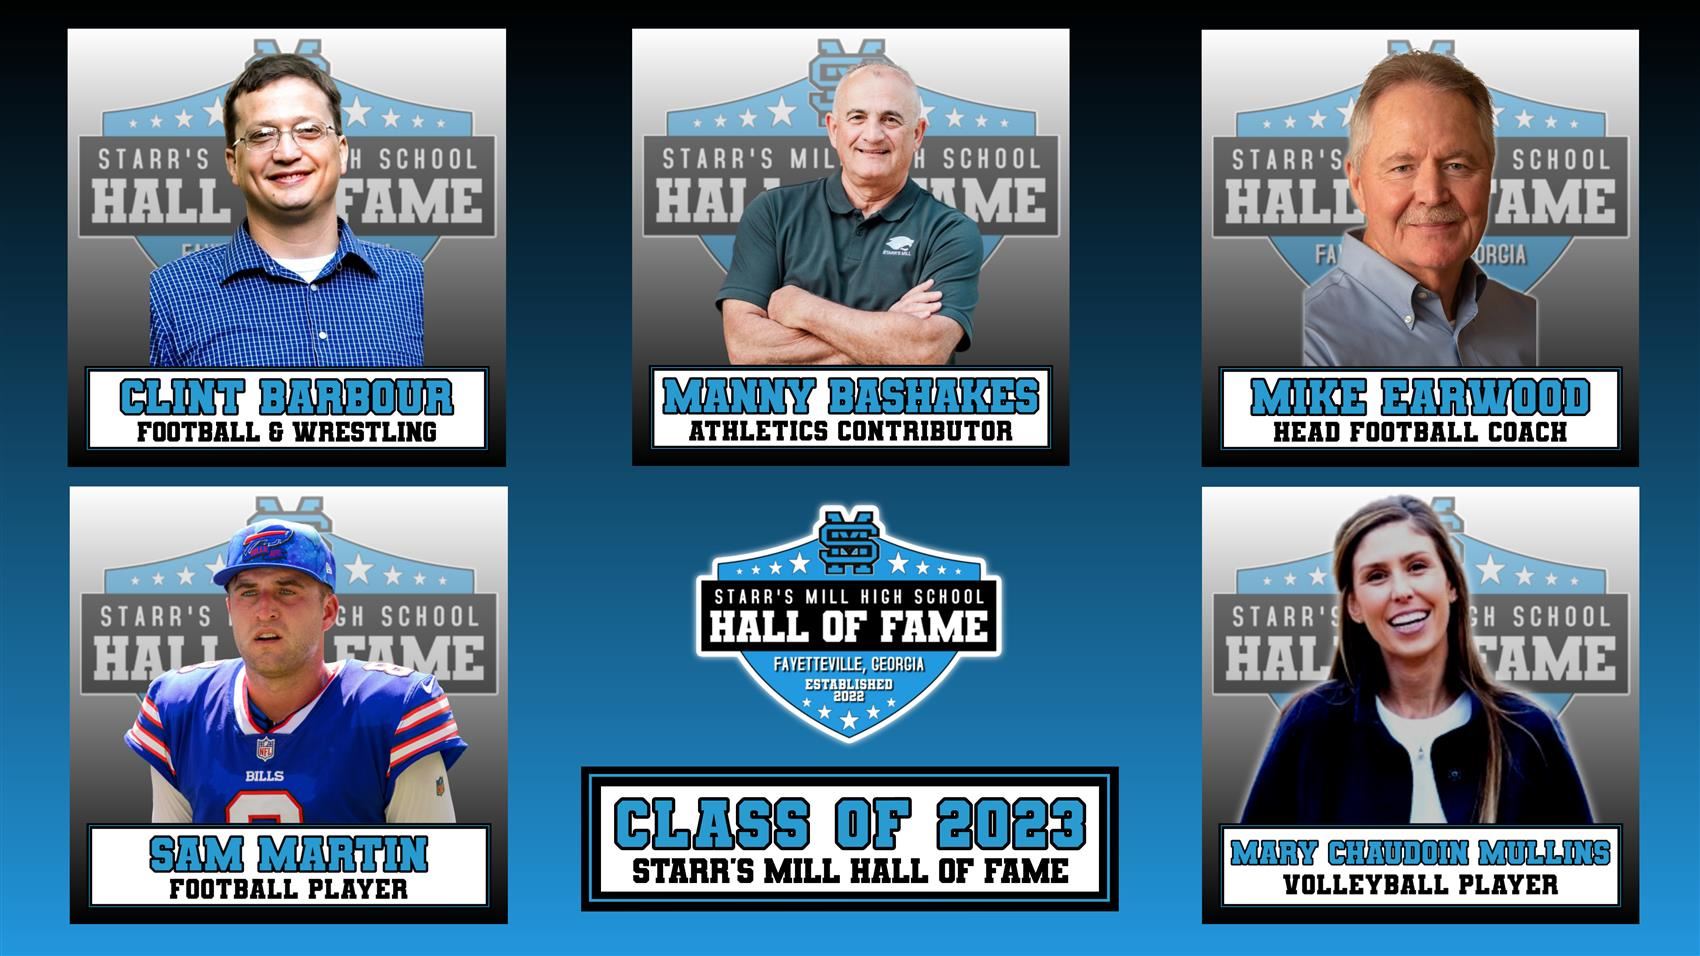 Class of 2023 Starr's Mill Hall of Fame